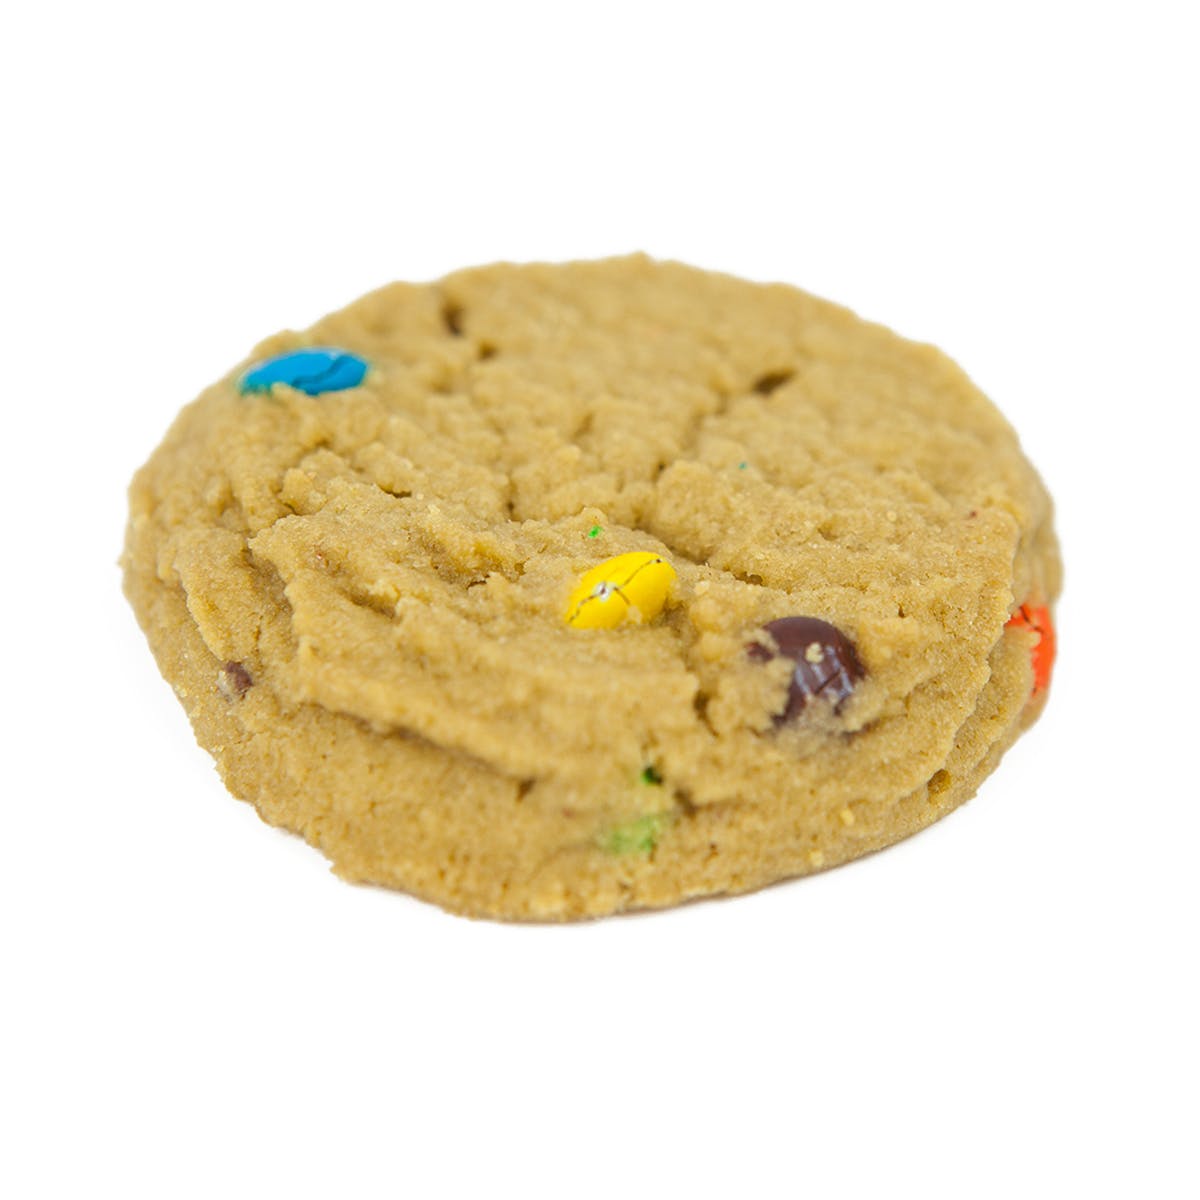 marijuana-dispensaries-the-chronic-boutique-in-colorado-springs-peanut-butter-chocolate-bits-cookie-500mg-2c-medical